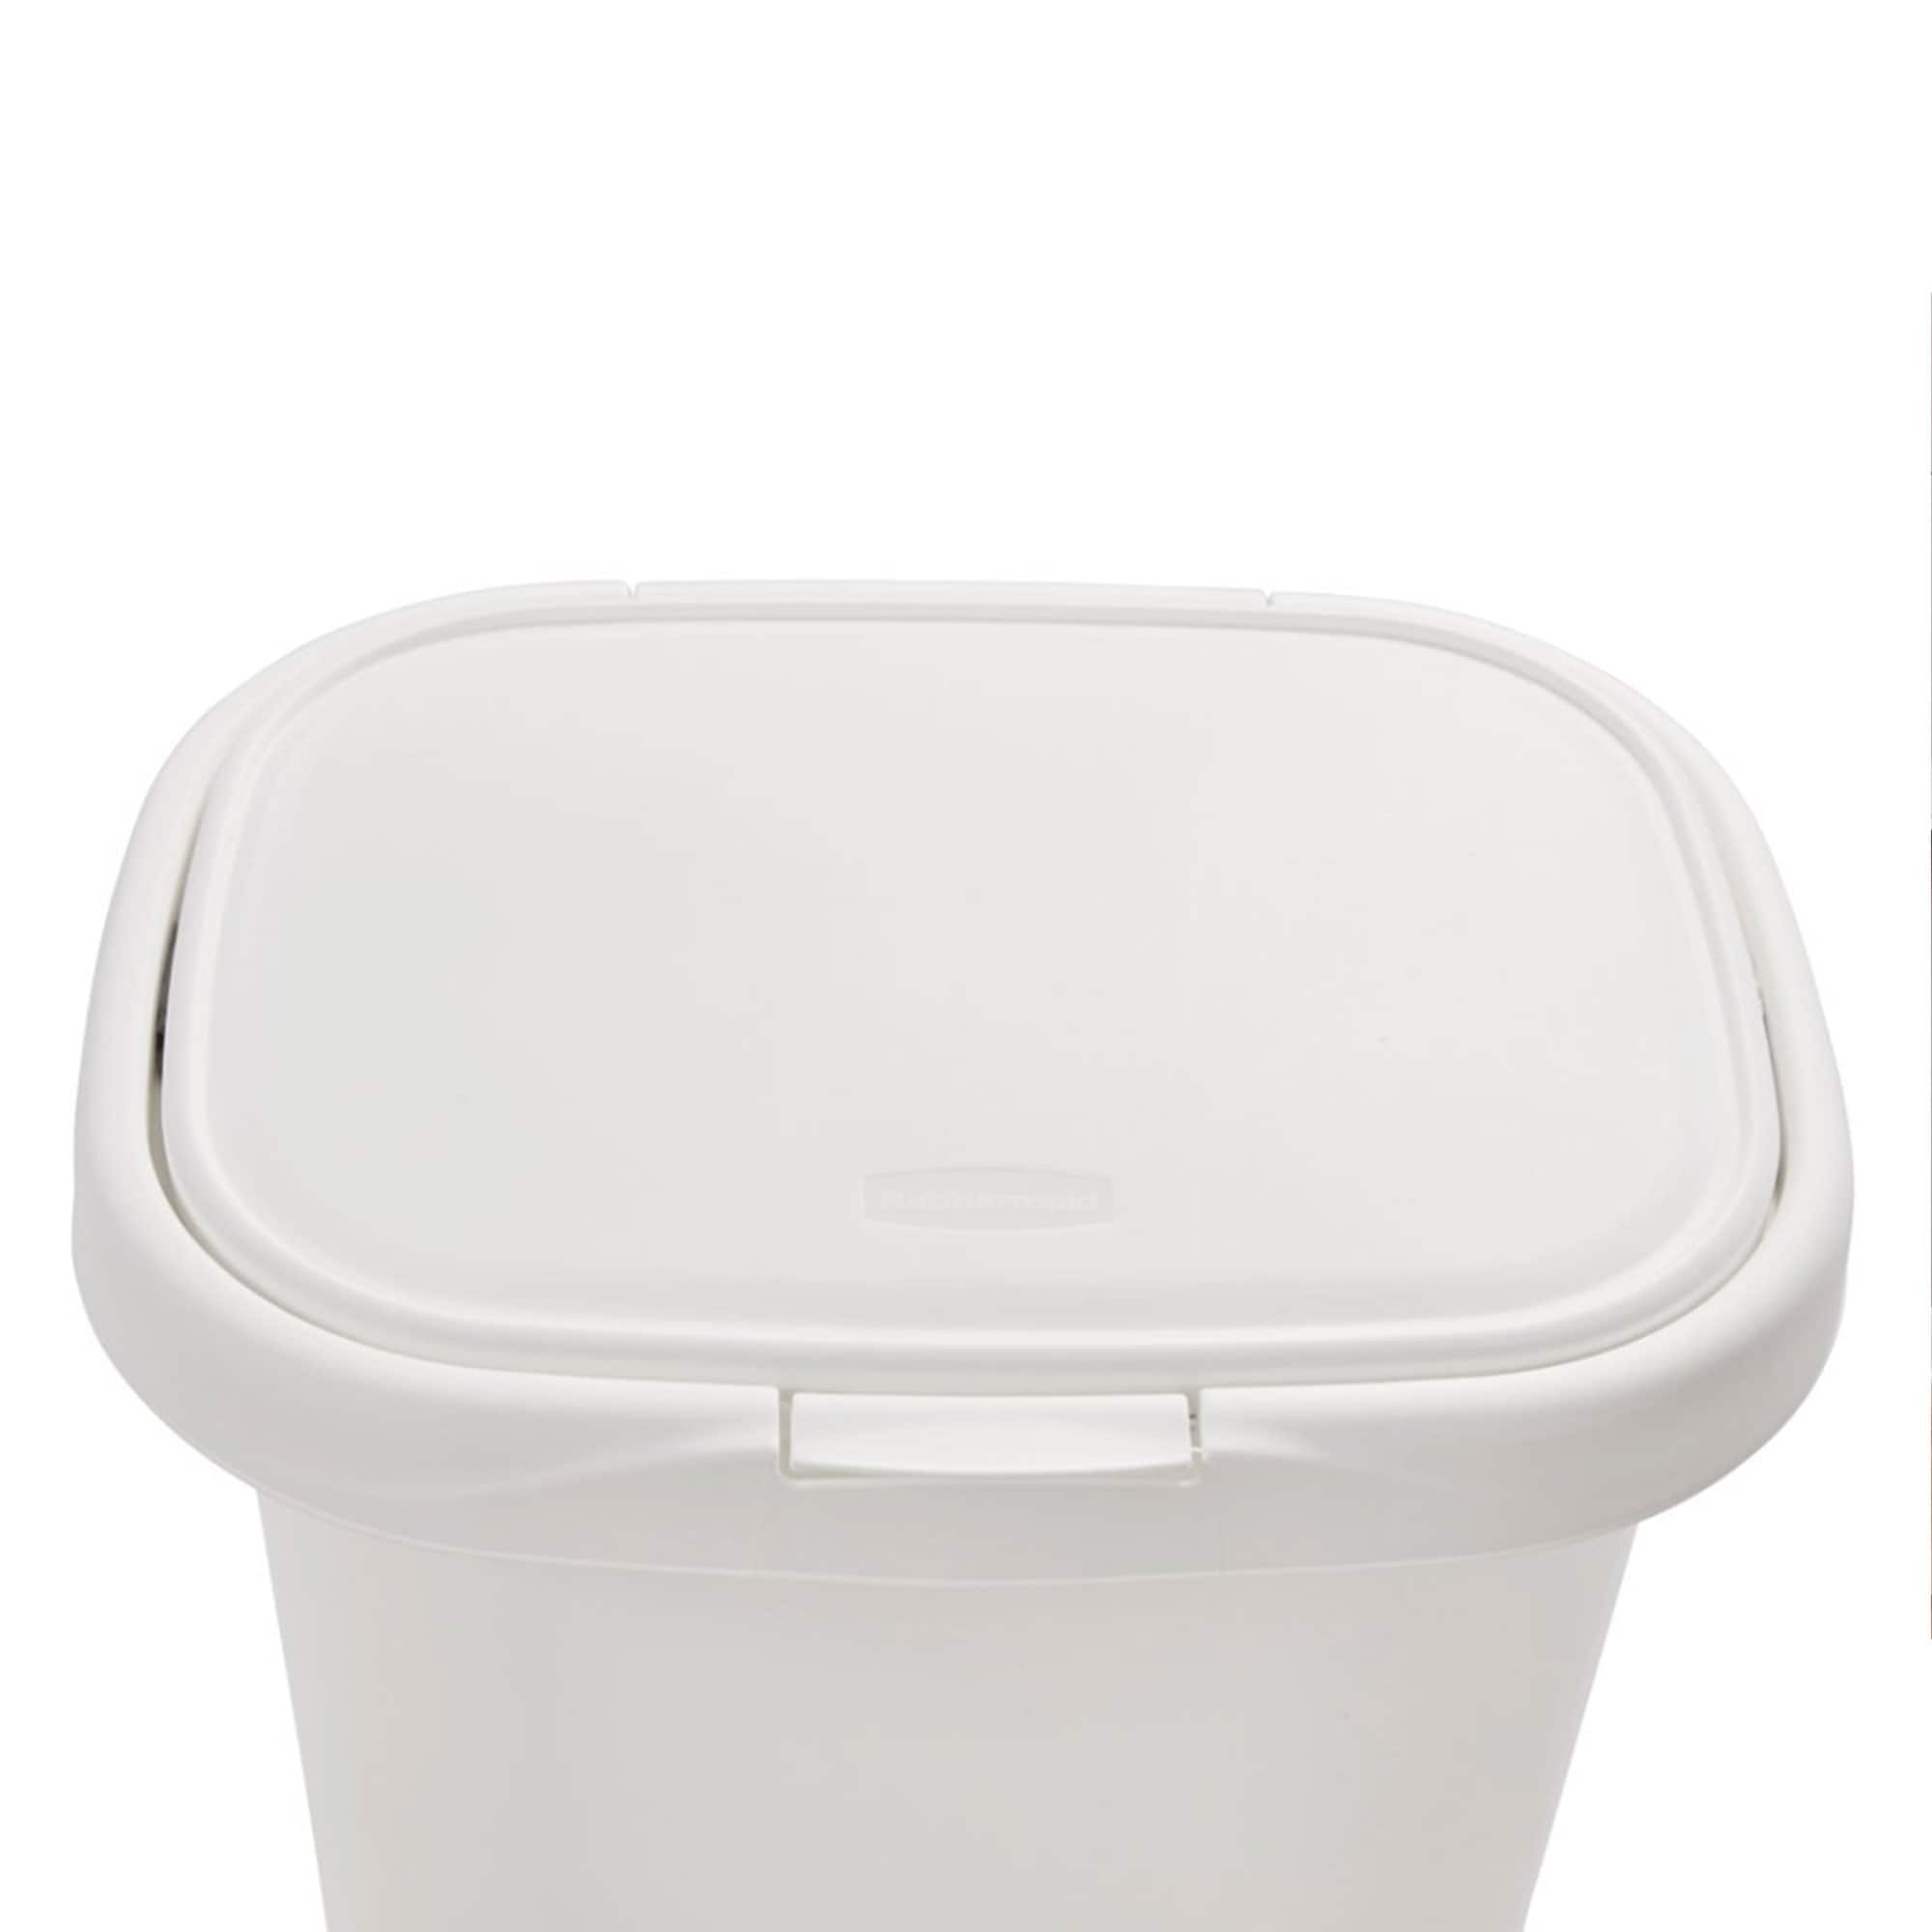 https://ak1.ostkcdn.com/images/products/is/images/direct/3ee4d3a4c29ba43fbd6674cebcf9ac5a04d5ccf4/Rubbermaid-13.25-Gallon-Rectangular-Spring-Top-Lid-Wastebasket%2C-White-%283-Pack%29.jpg